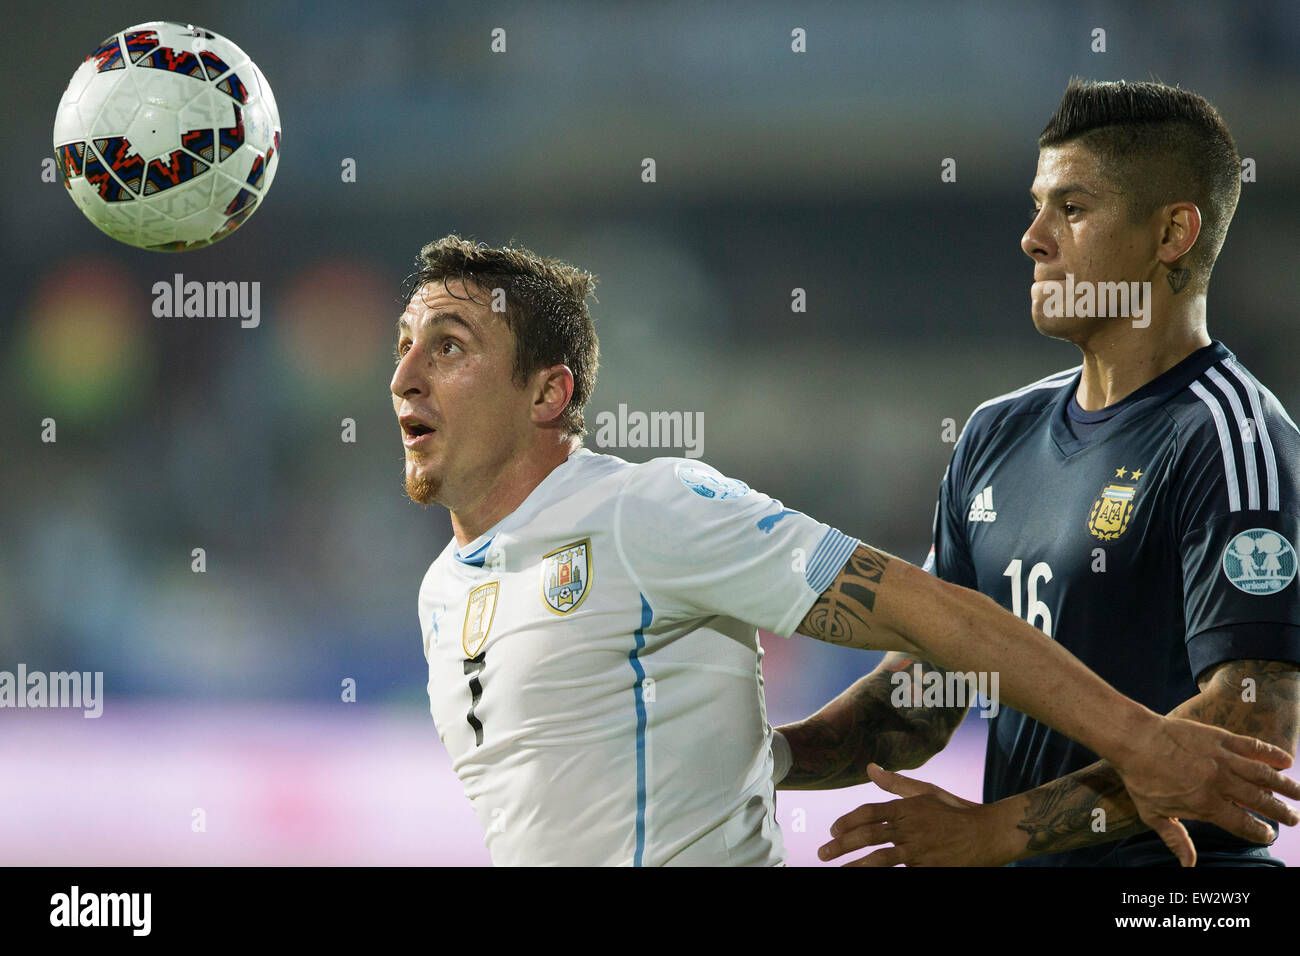 La Serena, Chile. 16th June, 2015. Marcos Rojo (R) of Argentina vies for the ball with Cristian Rodriguez of Uruguay during the Group B match at the 2015 American Cup, at La Portada stadium, in La Serena, Chile, on June 16, 2015. Argentina won 1-0. Credit:  Luis Echeverria/Xinhua/Alamy Live News Stock Photo